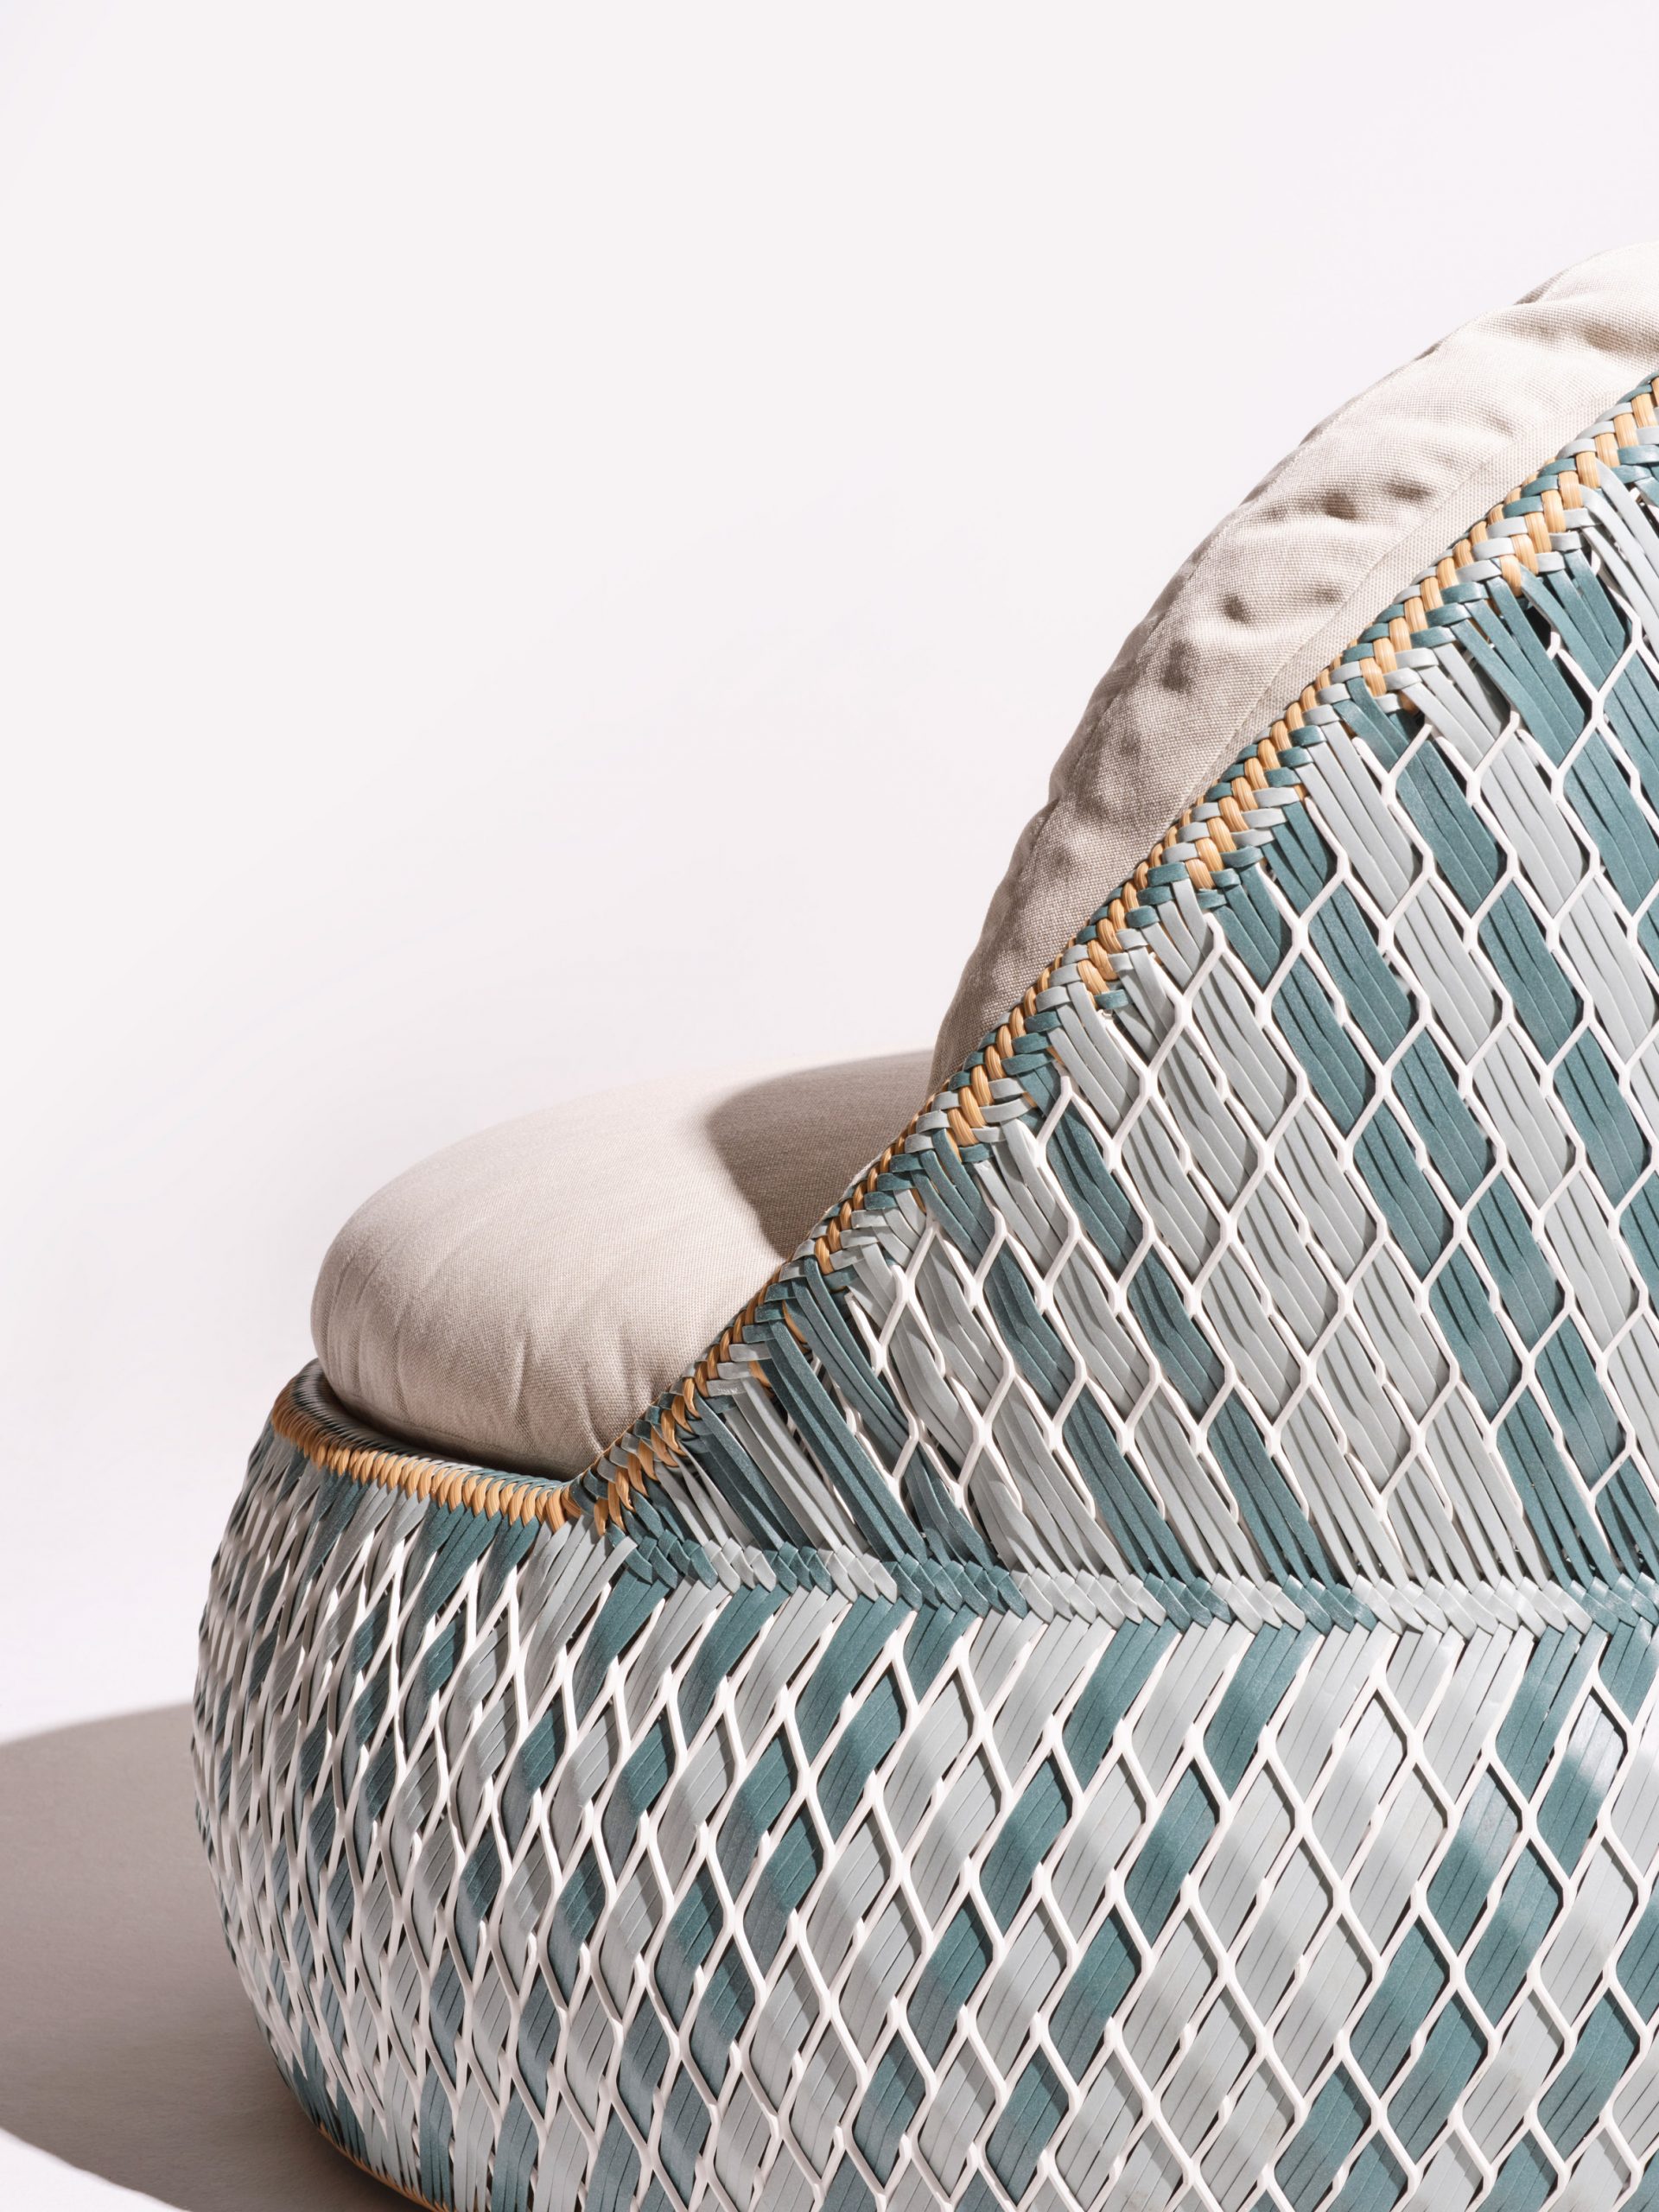 A close-up of a woven chair designed for Dedon